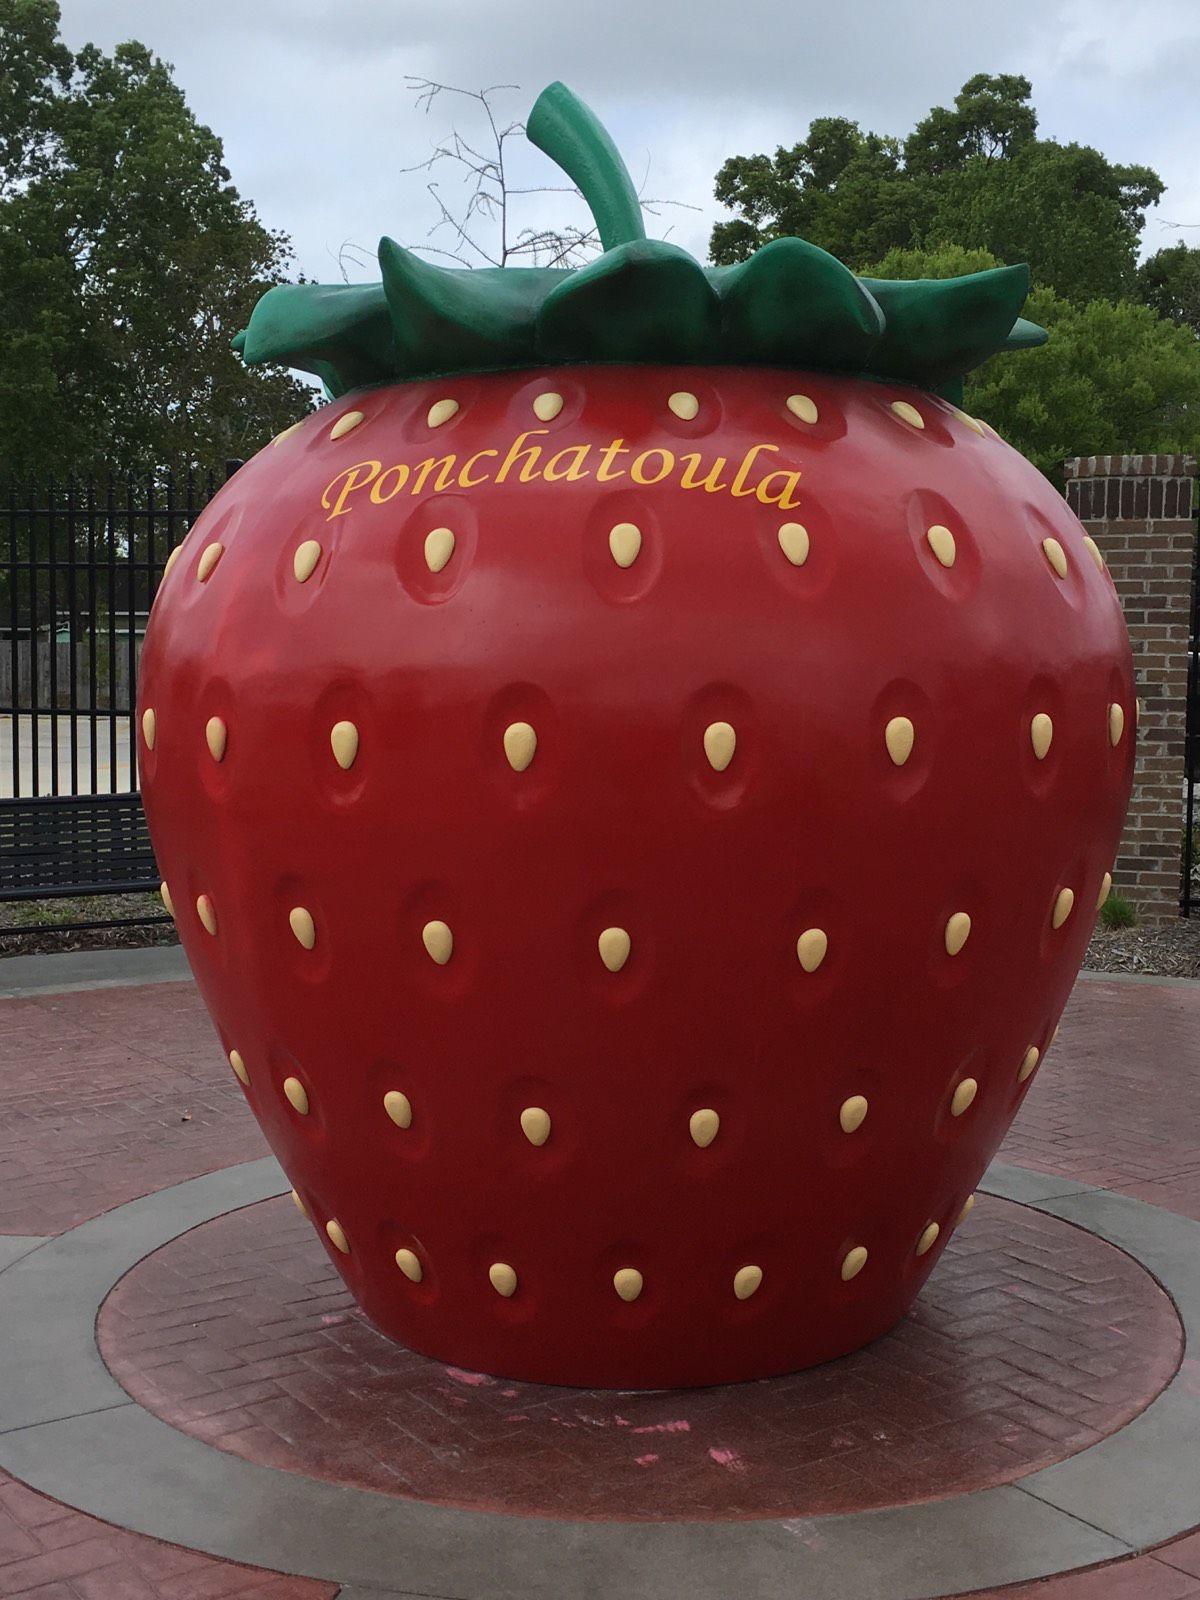 Giant Strawberry Statue In Ponchatoula Has Become Berry Photogenic Spot As Festival Gets Underway Livingston Tangipahoa Theadvocate Com